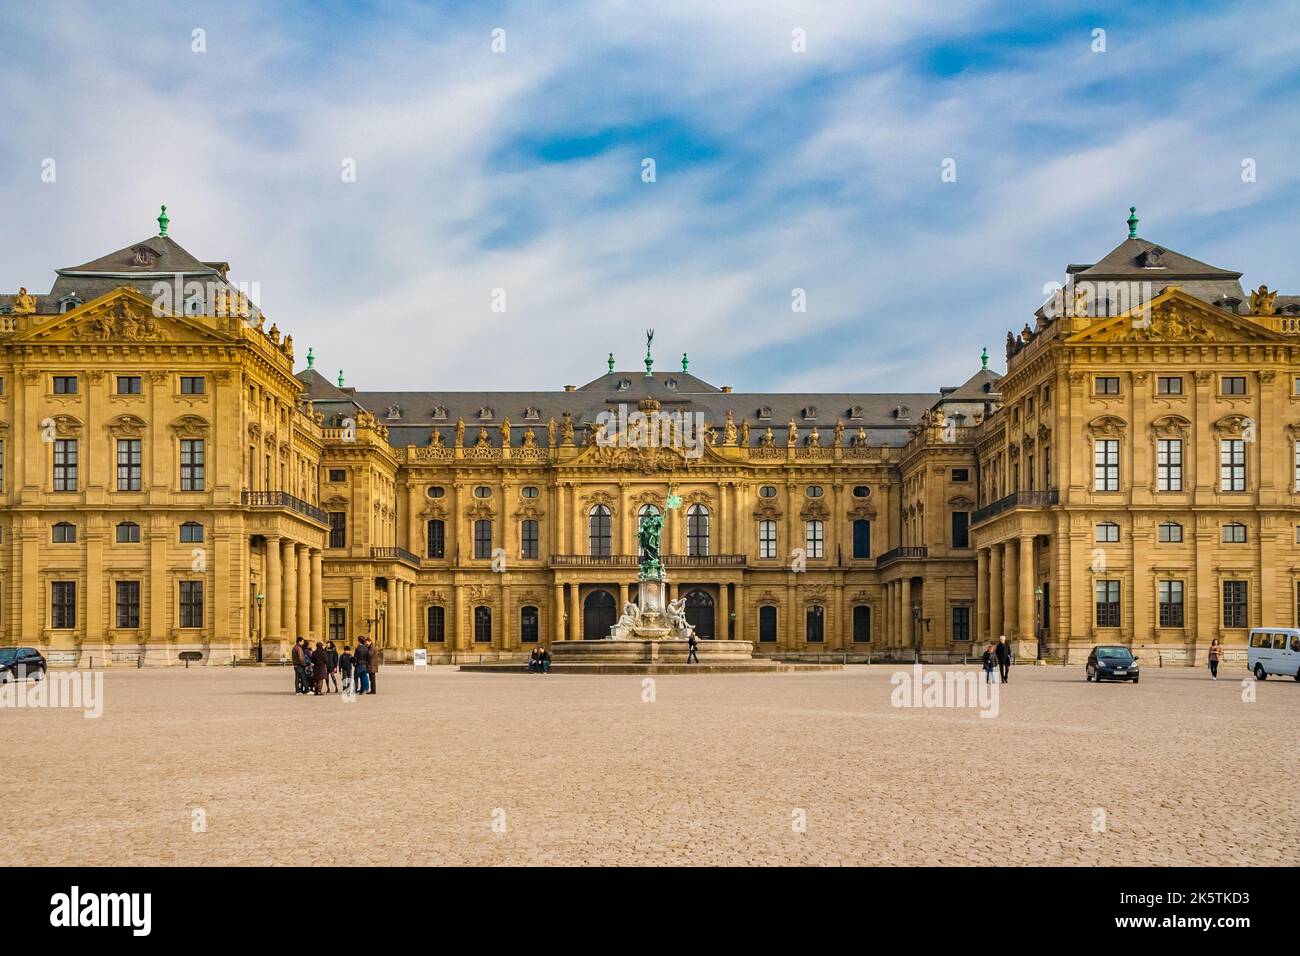 Picturesque view of the front facade of the famous Würzburg Residence in Baroque style in Germany. The side wings partially enclose the Cour d'honneur... Stock Photo